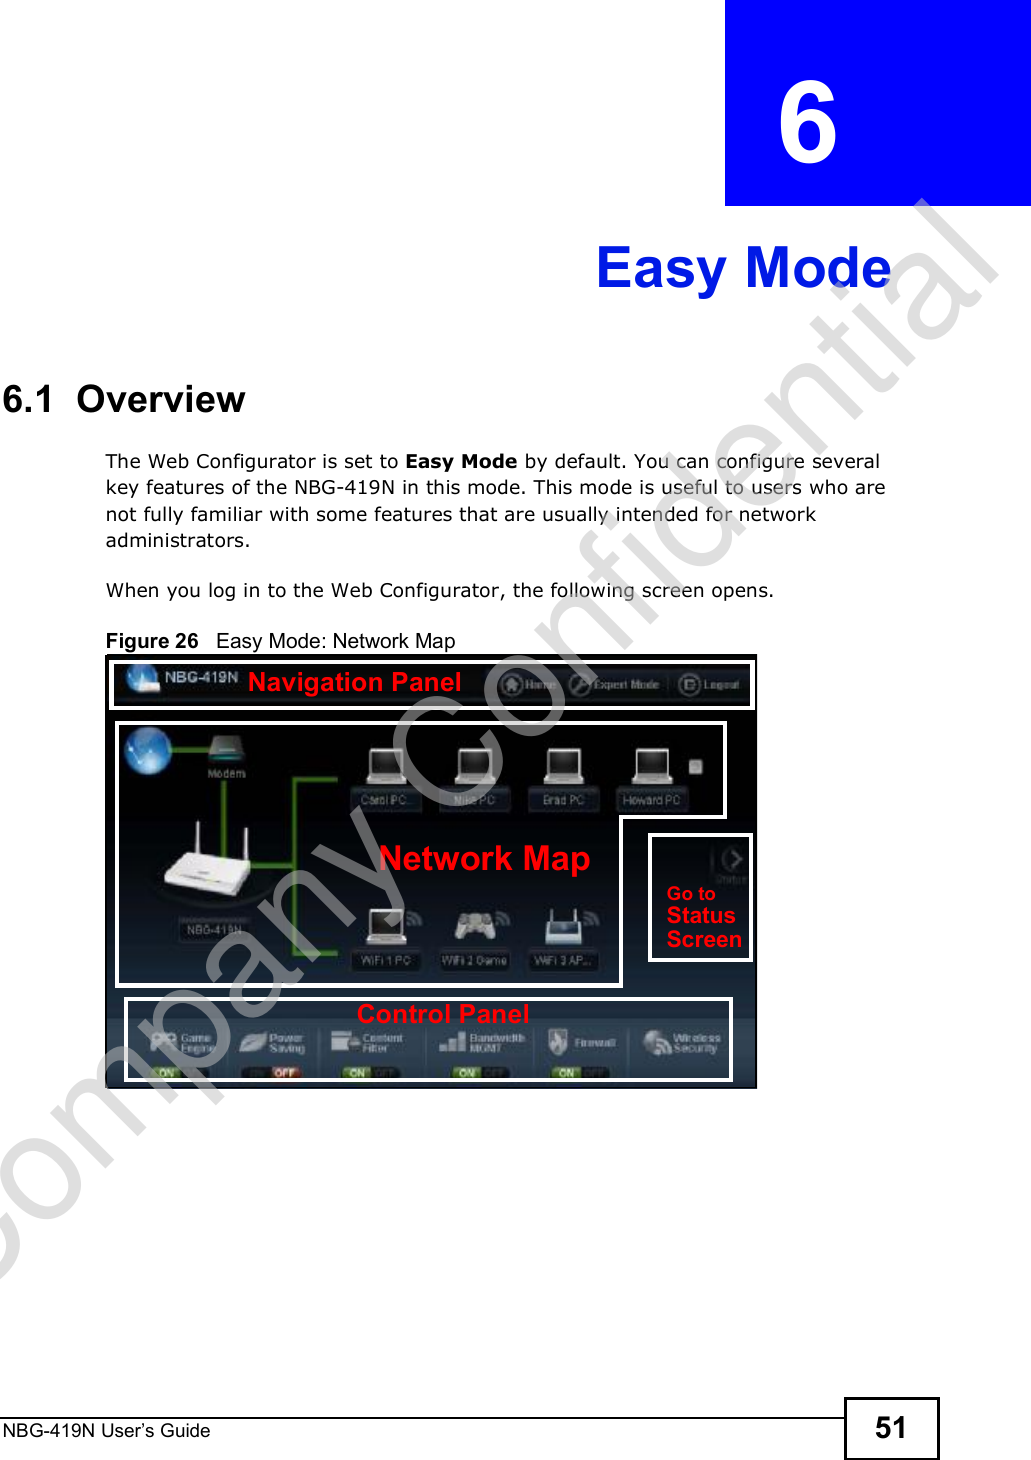 NBG-419N User s Guide 51CHAPTER  6 Easy Mode6.1  OverviewThe Web Configurator is set to Easy Mode by default. You can configure several key features of the NBG-419N in this mode. This mode is useful to users who are not fully familiar with some features that are usually intended for network administrators.When you log in to the Web Configurator, the following screen opens.Figure 26   Easy Mode: Network Map Network MapControl PanelGo toStatusScreenNavigation PanelCompany Confidential